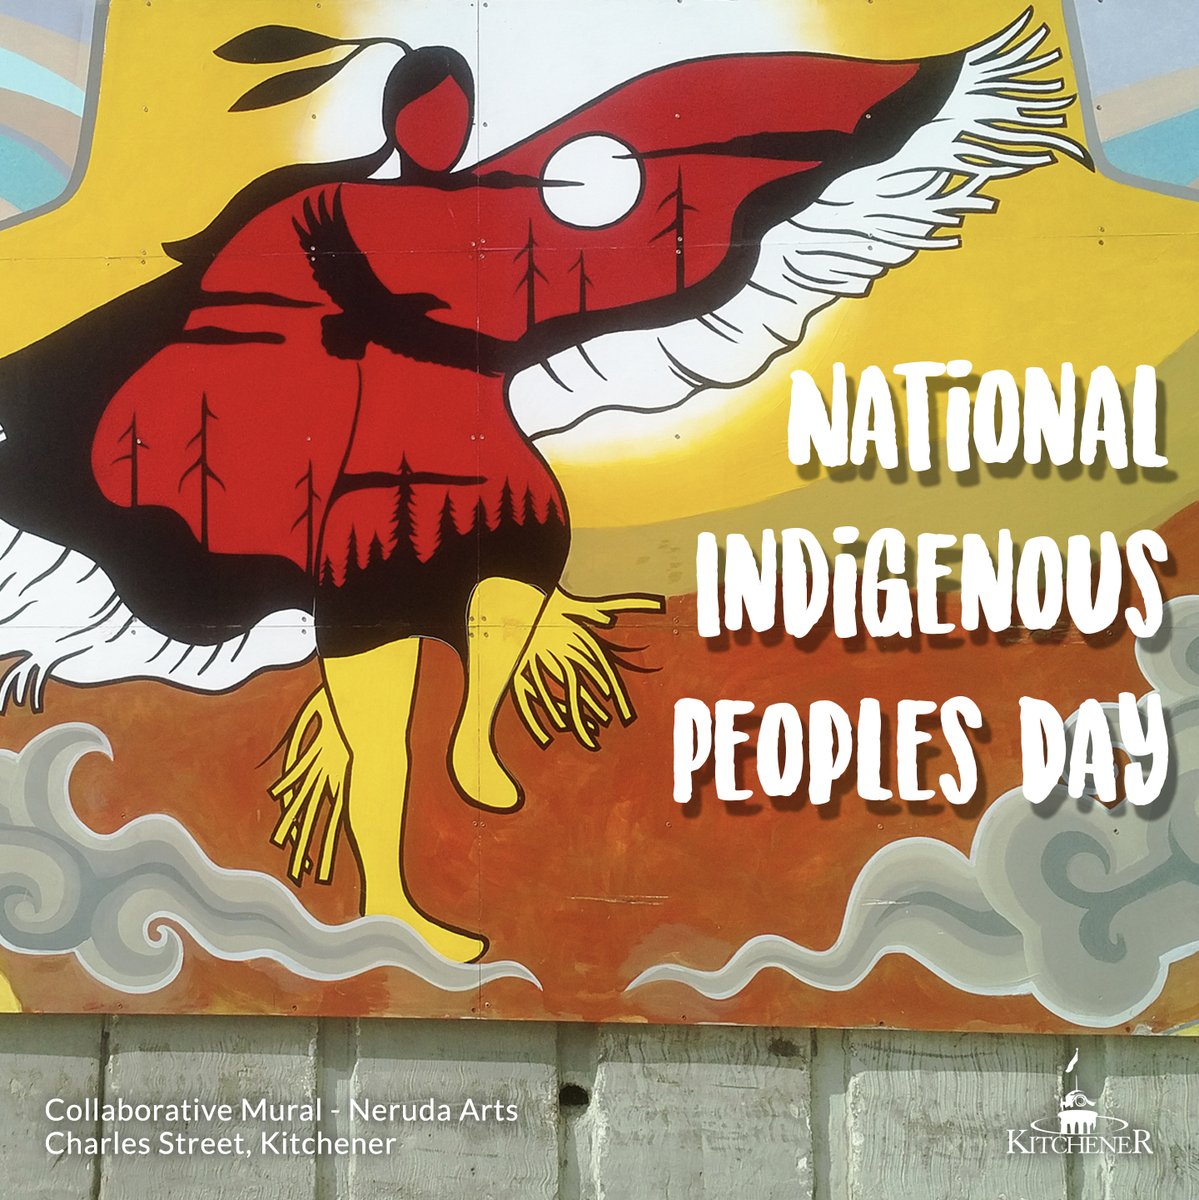 Today marks National  #IndigenousPeoplesDay   in the  @CityKitchener and across Canada - a day dedicated to recognizing and celebrating the unique and diverse cultural heritage of First Nations, Inuit and Métis peoples. Let's use today to celebrate & renew our commitments to action.